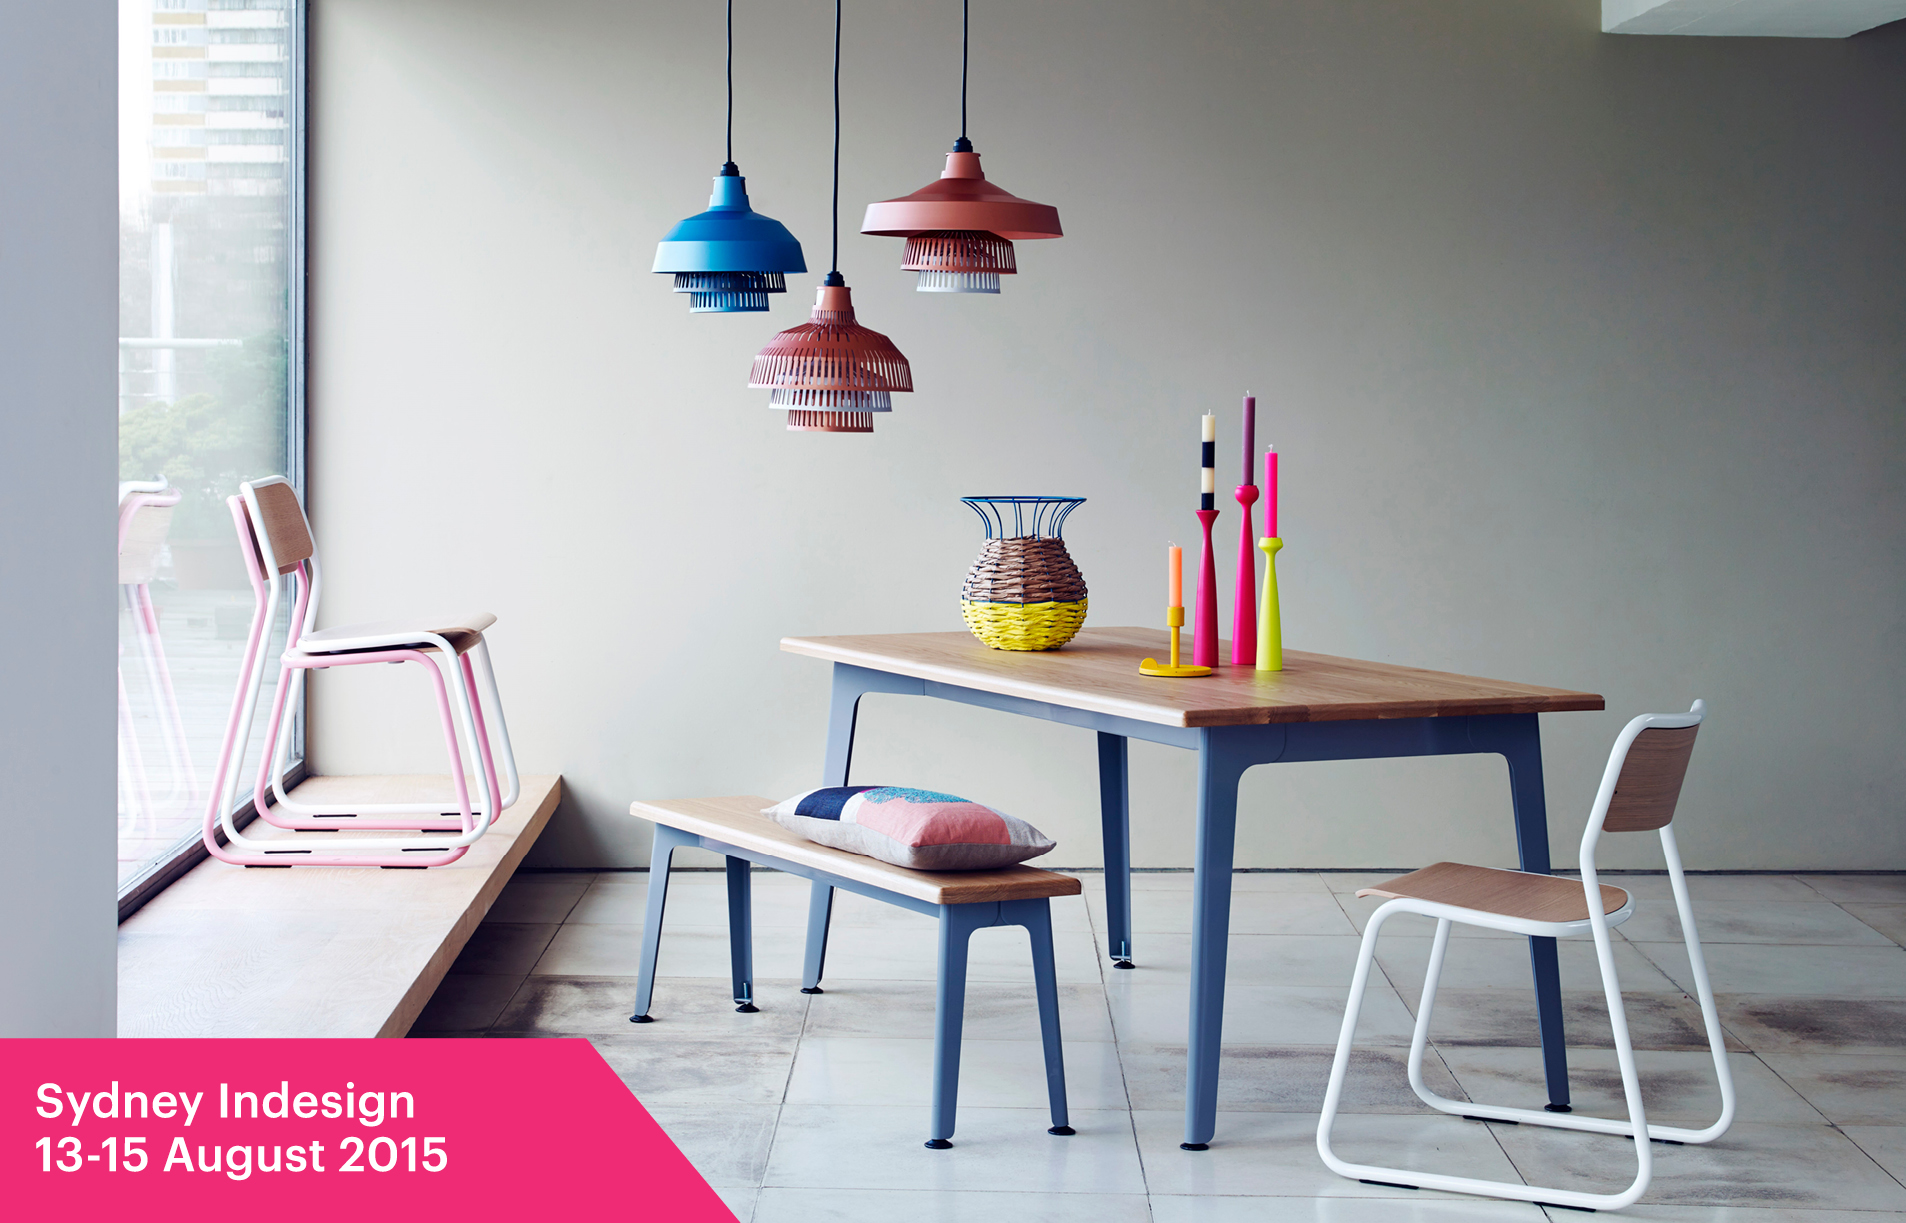 The world’s top design brands and best international products launching in Sydney